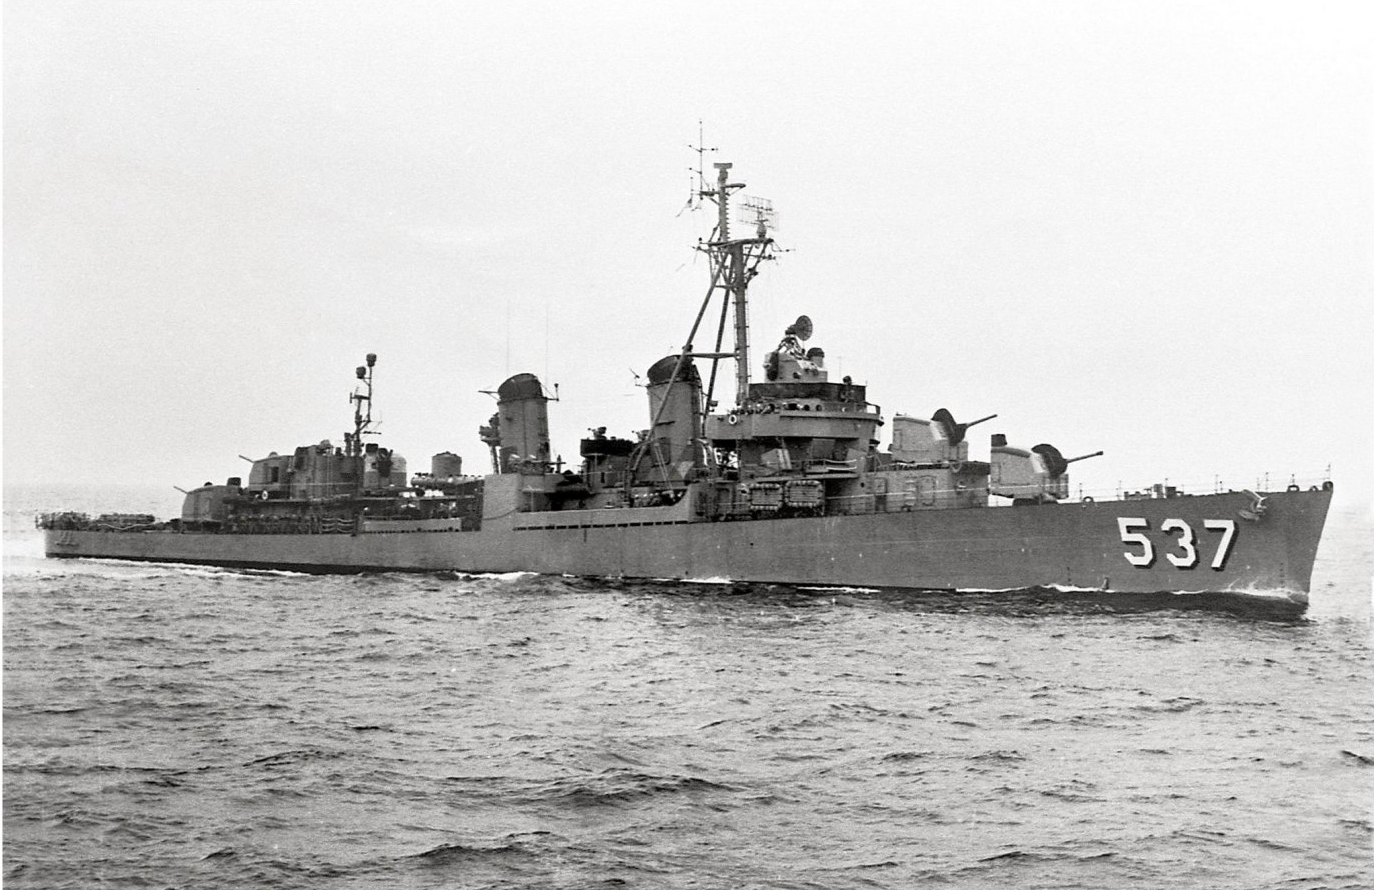 Save ‘The Sullivans’ – Famous WW2 Destroyer in Danger of Being Lost